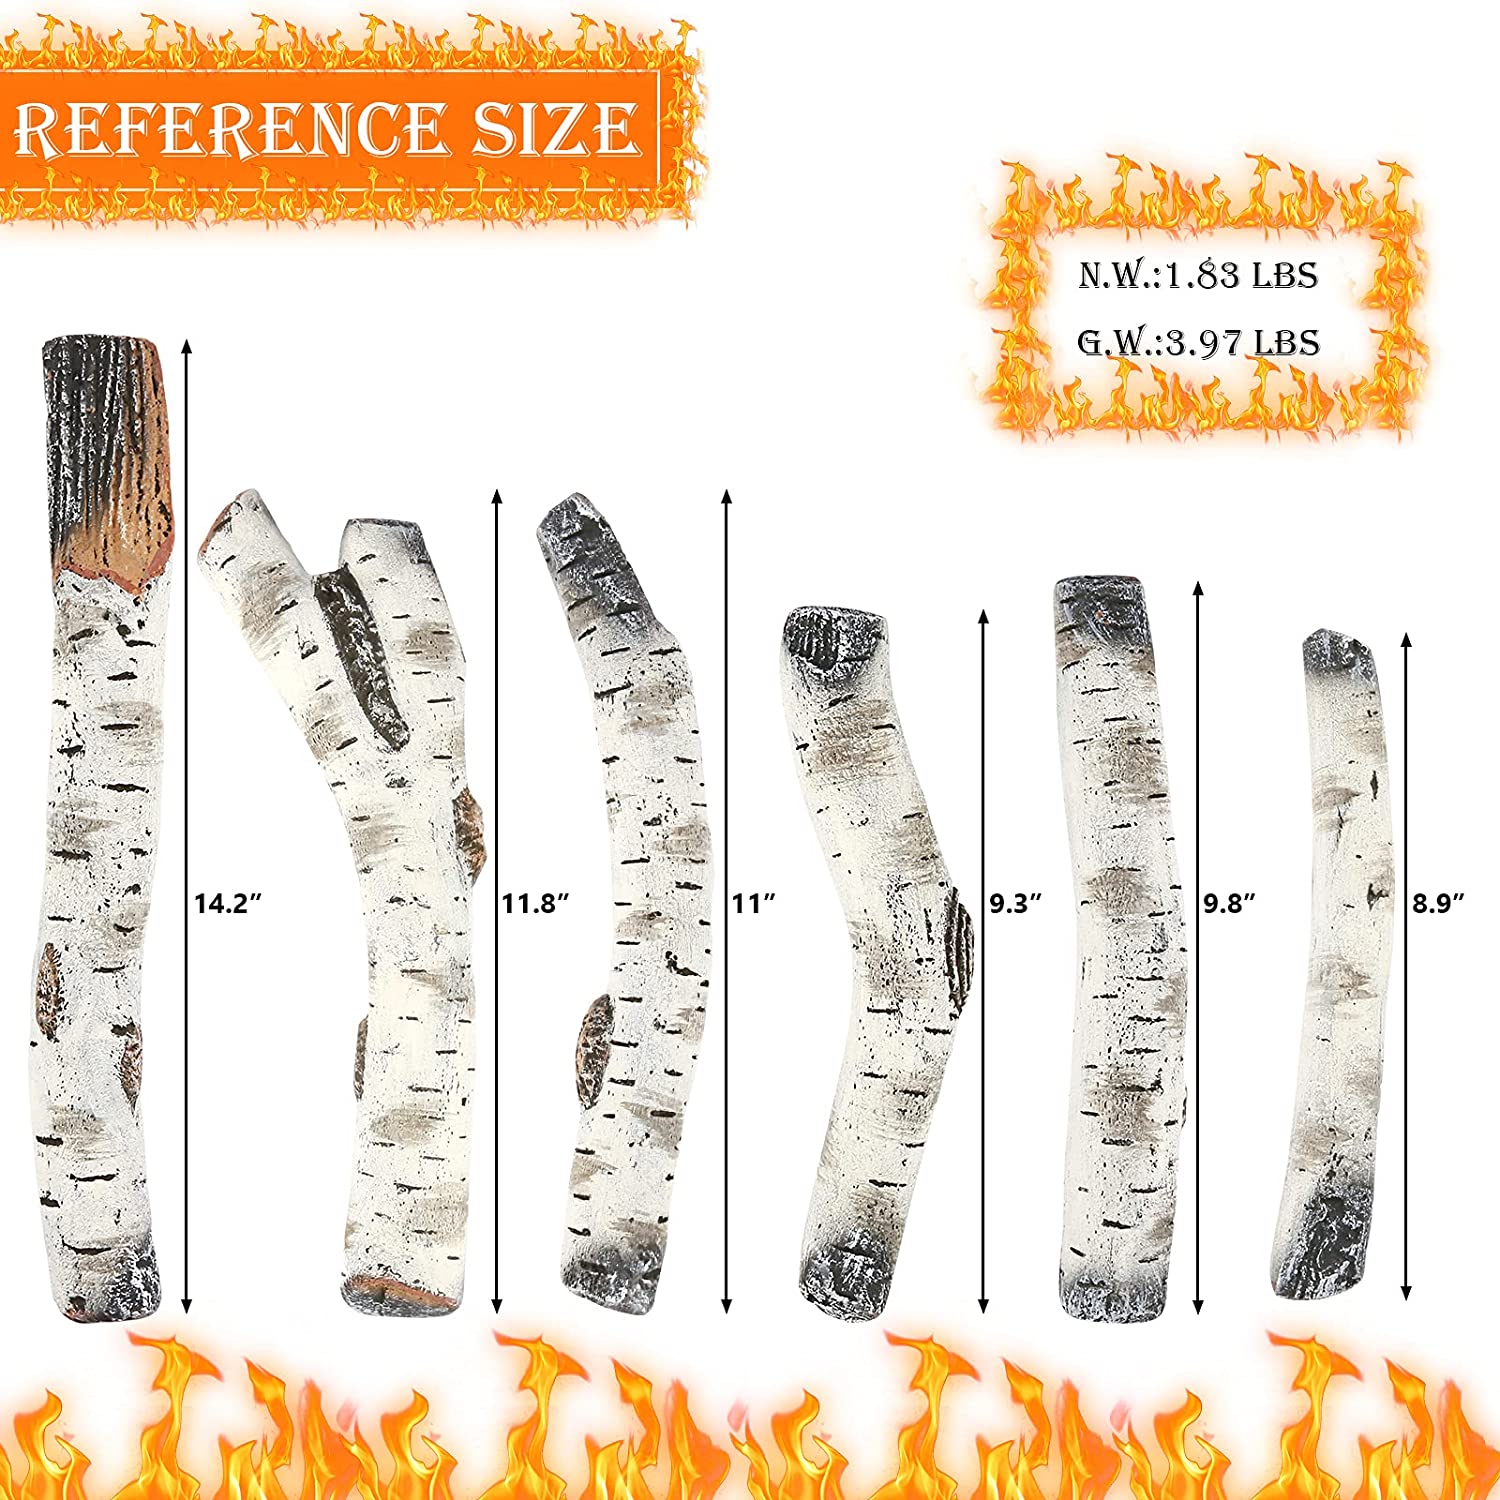 GrillPartsReplacement - Online BBQ Parts Retailer GAS Fireplace Logs, Ventless Ceramic Logs for GAS Fire Pits, 6 Pcs White Birch Wood Set, Electric, Propane GAS Fireplace Decorative Inserts